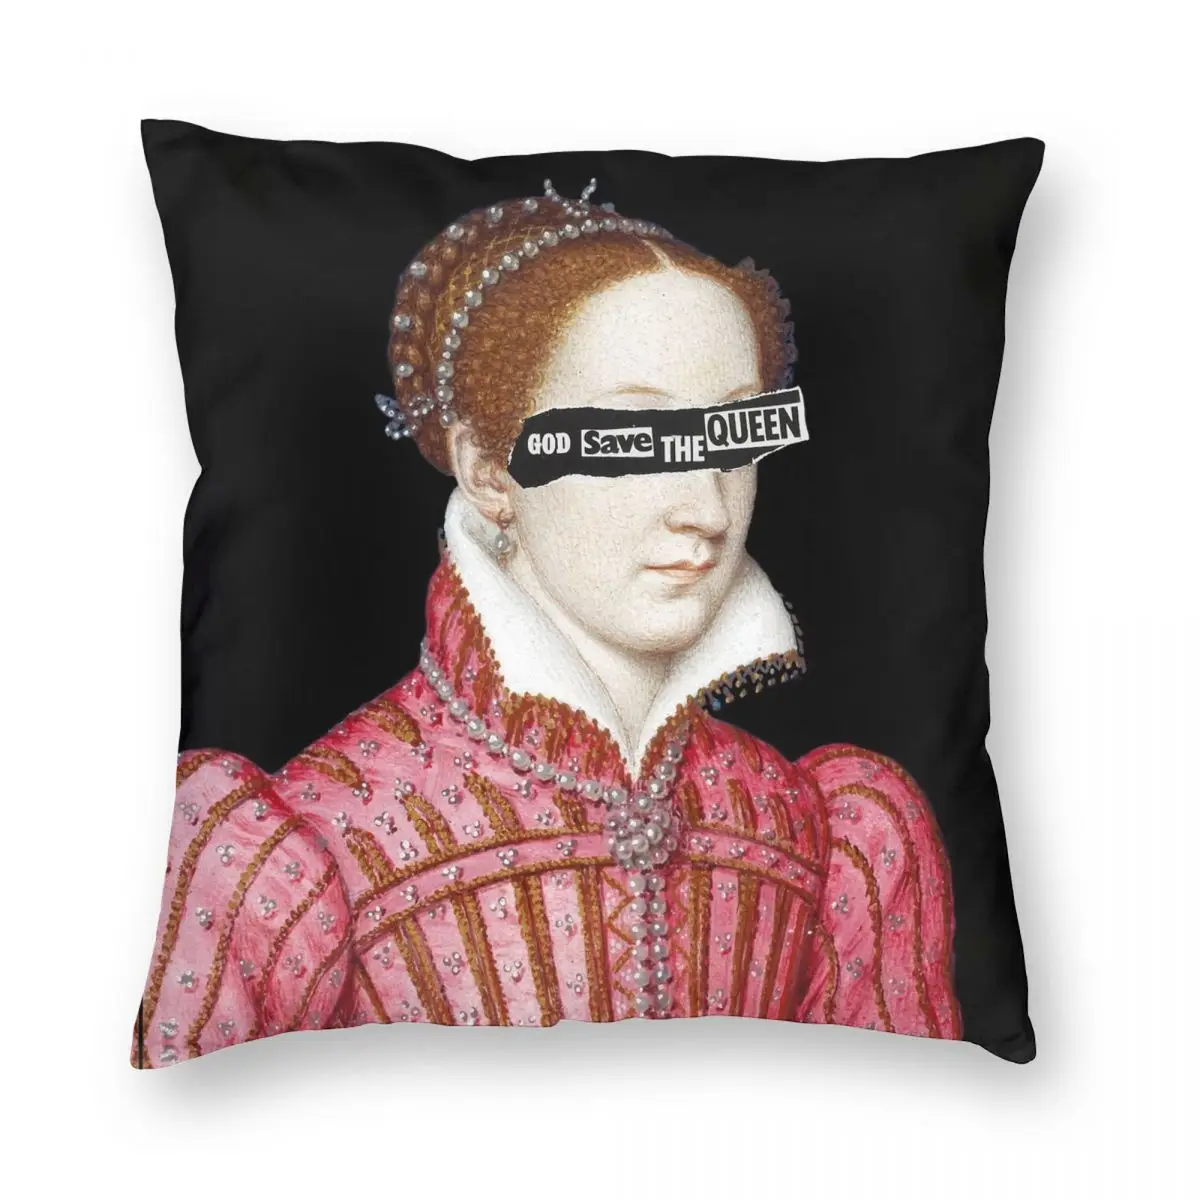 

Mary Queen Of Scots Square Pillowcase Polyester Linen Velvet Creative Zip Decor Room Cushion Cover